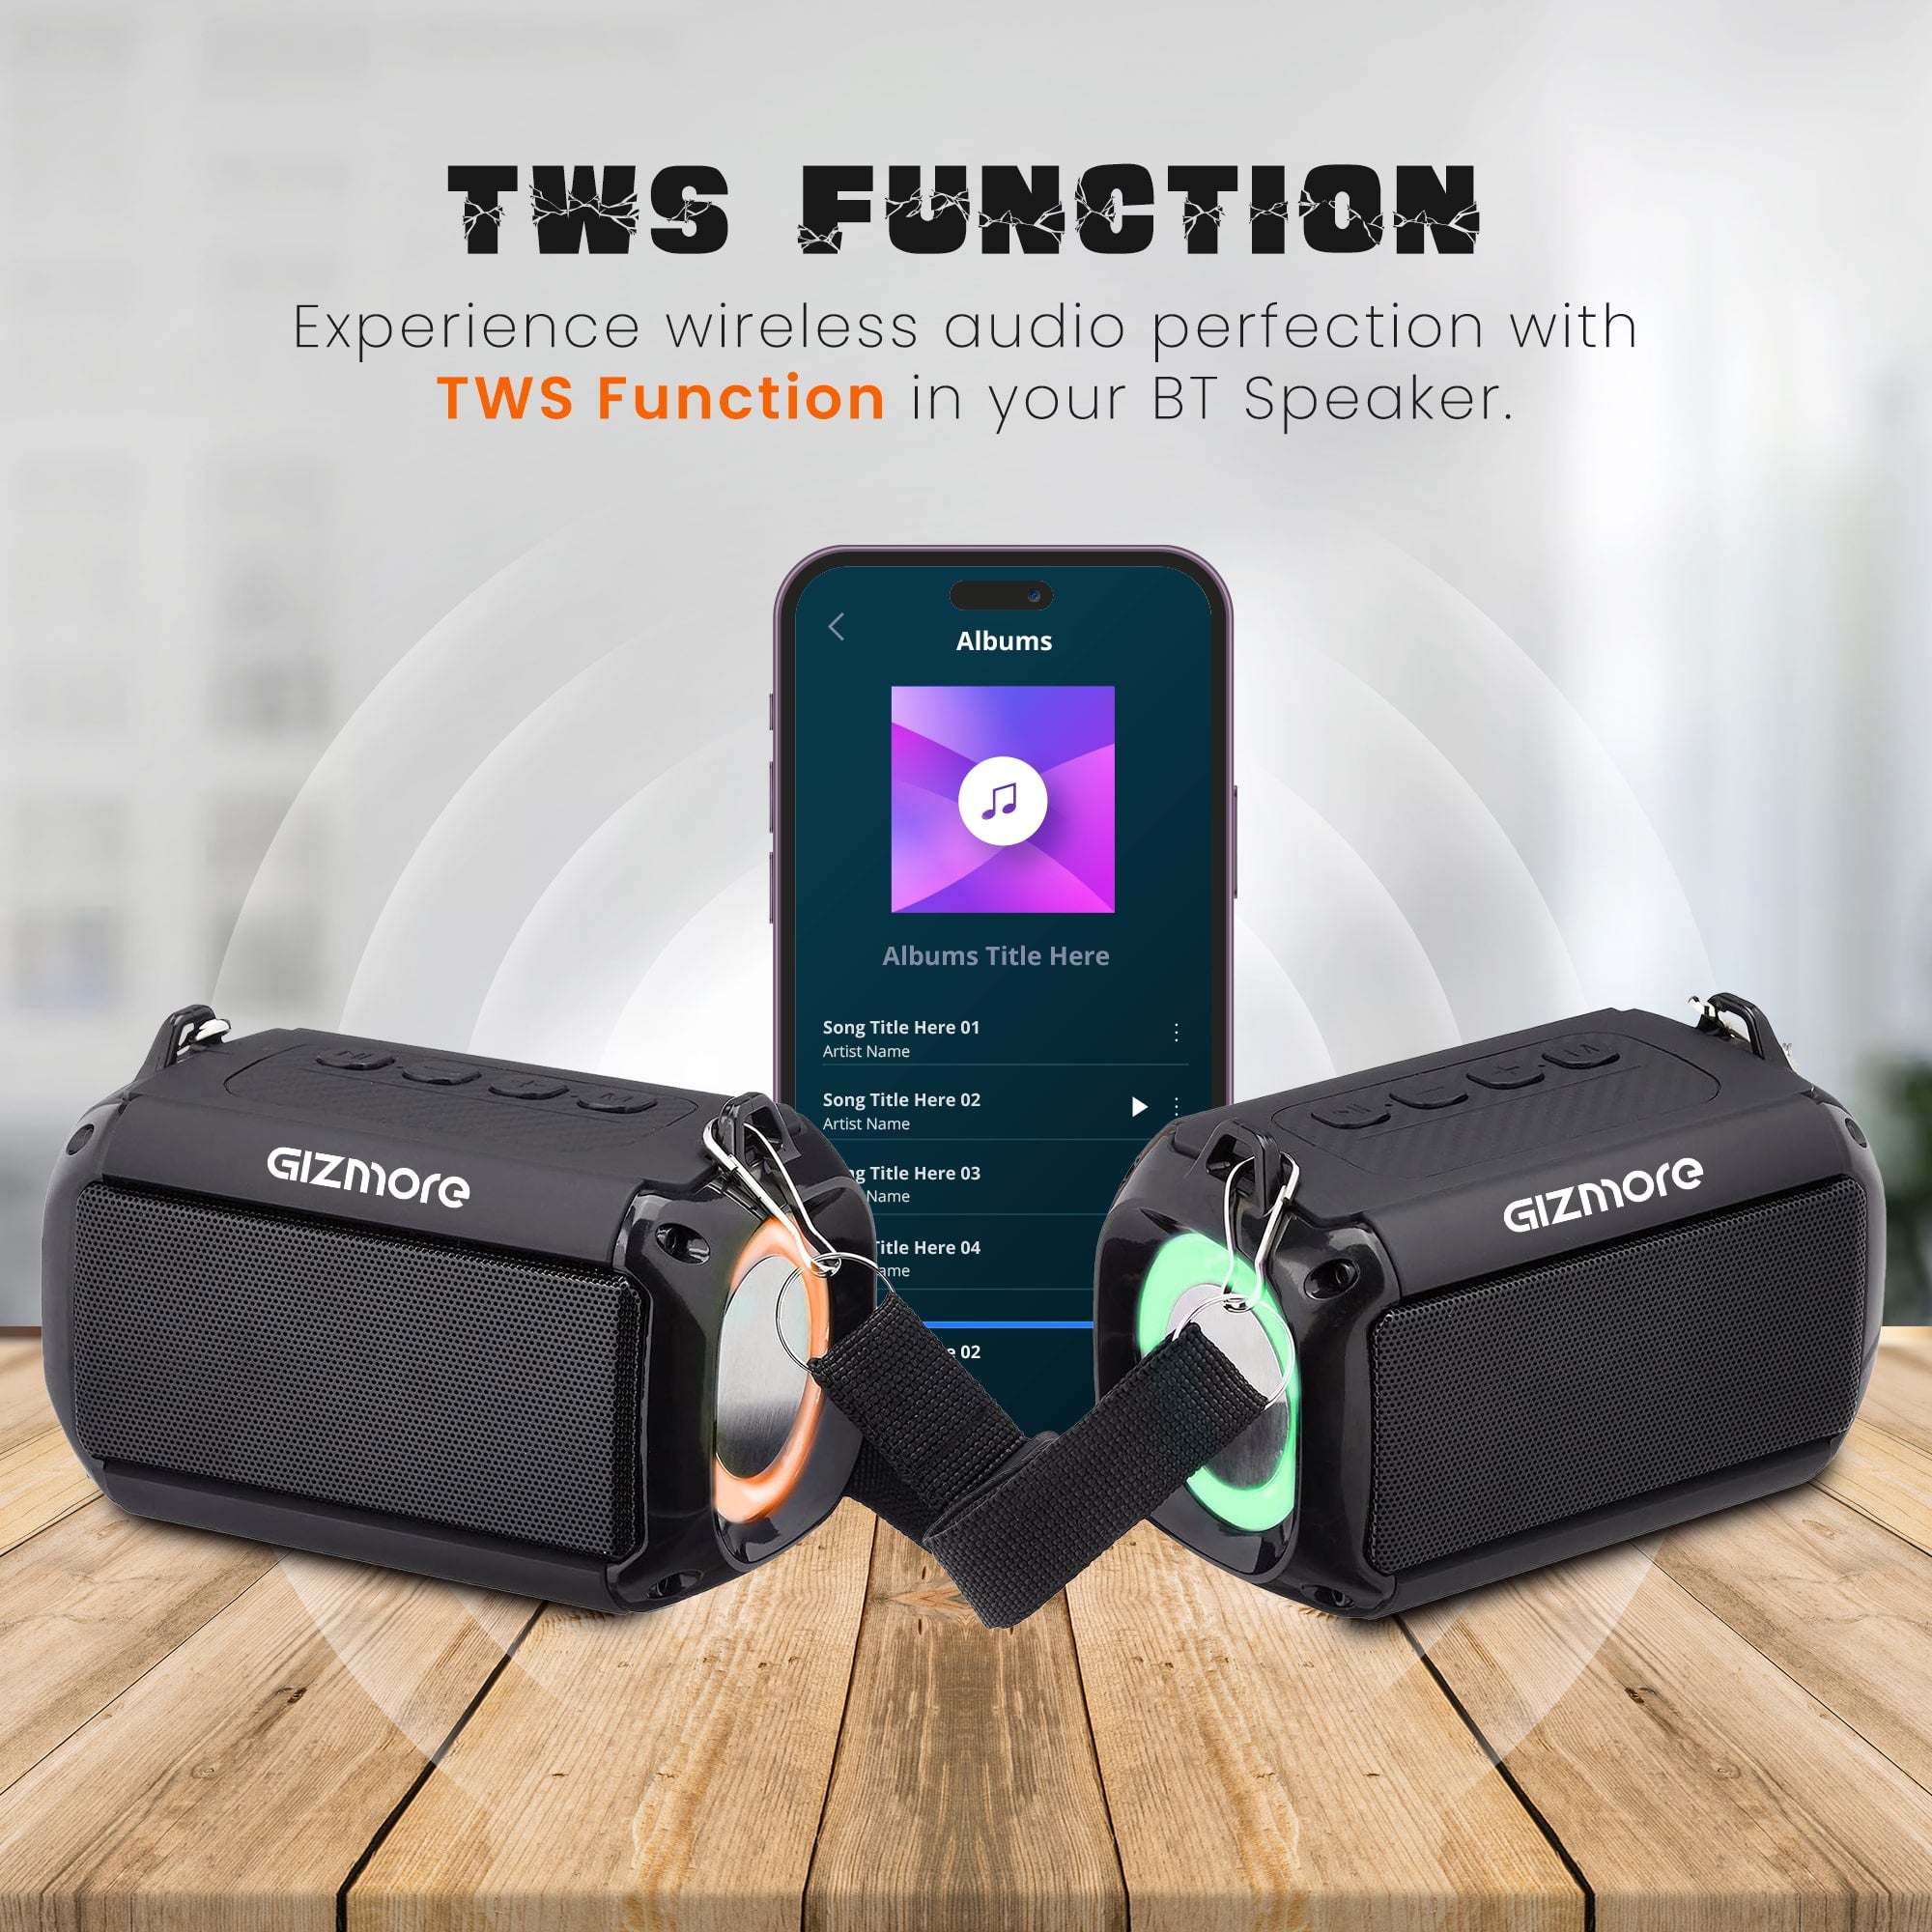 GIZMORE MS510 DAYNAMITE 10W BT Speaker, 14 Hrs Playtime with TWS Function, RGB Lights, Dynamic Bass, Rubber Finish, Multiple Connectivity, Volume Control and Noise Cancelling Mic (Black)